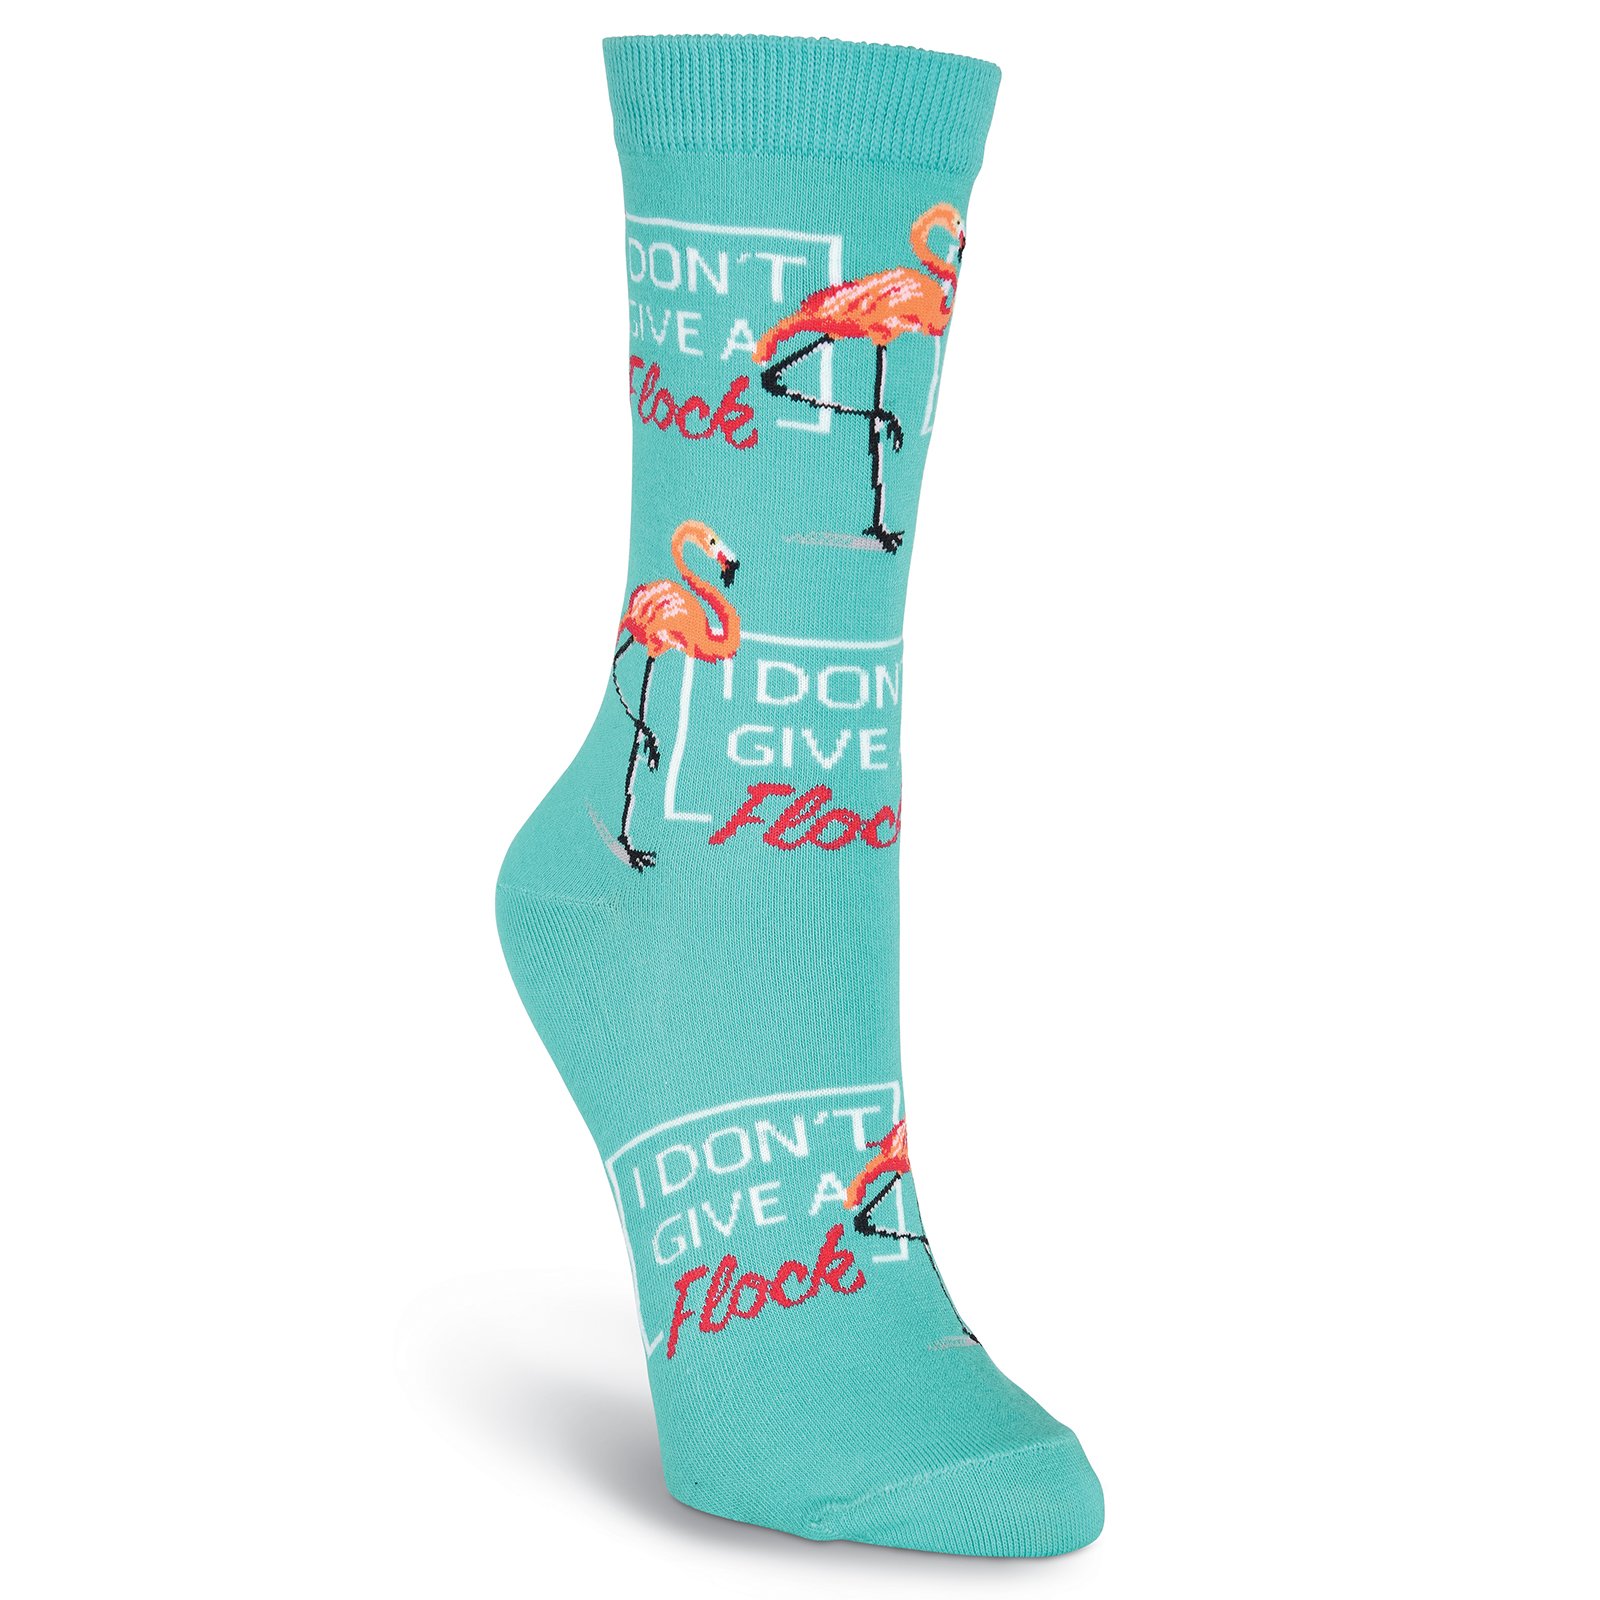 K. Bell Socks womens Funny Jokes and Wordplay Novelty Crew Casual Sock, Don't Give a Flock (Turquoise), Medium US